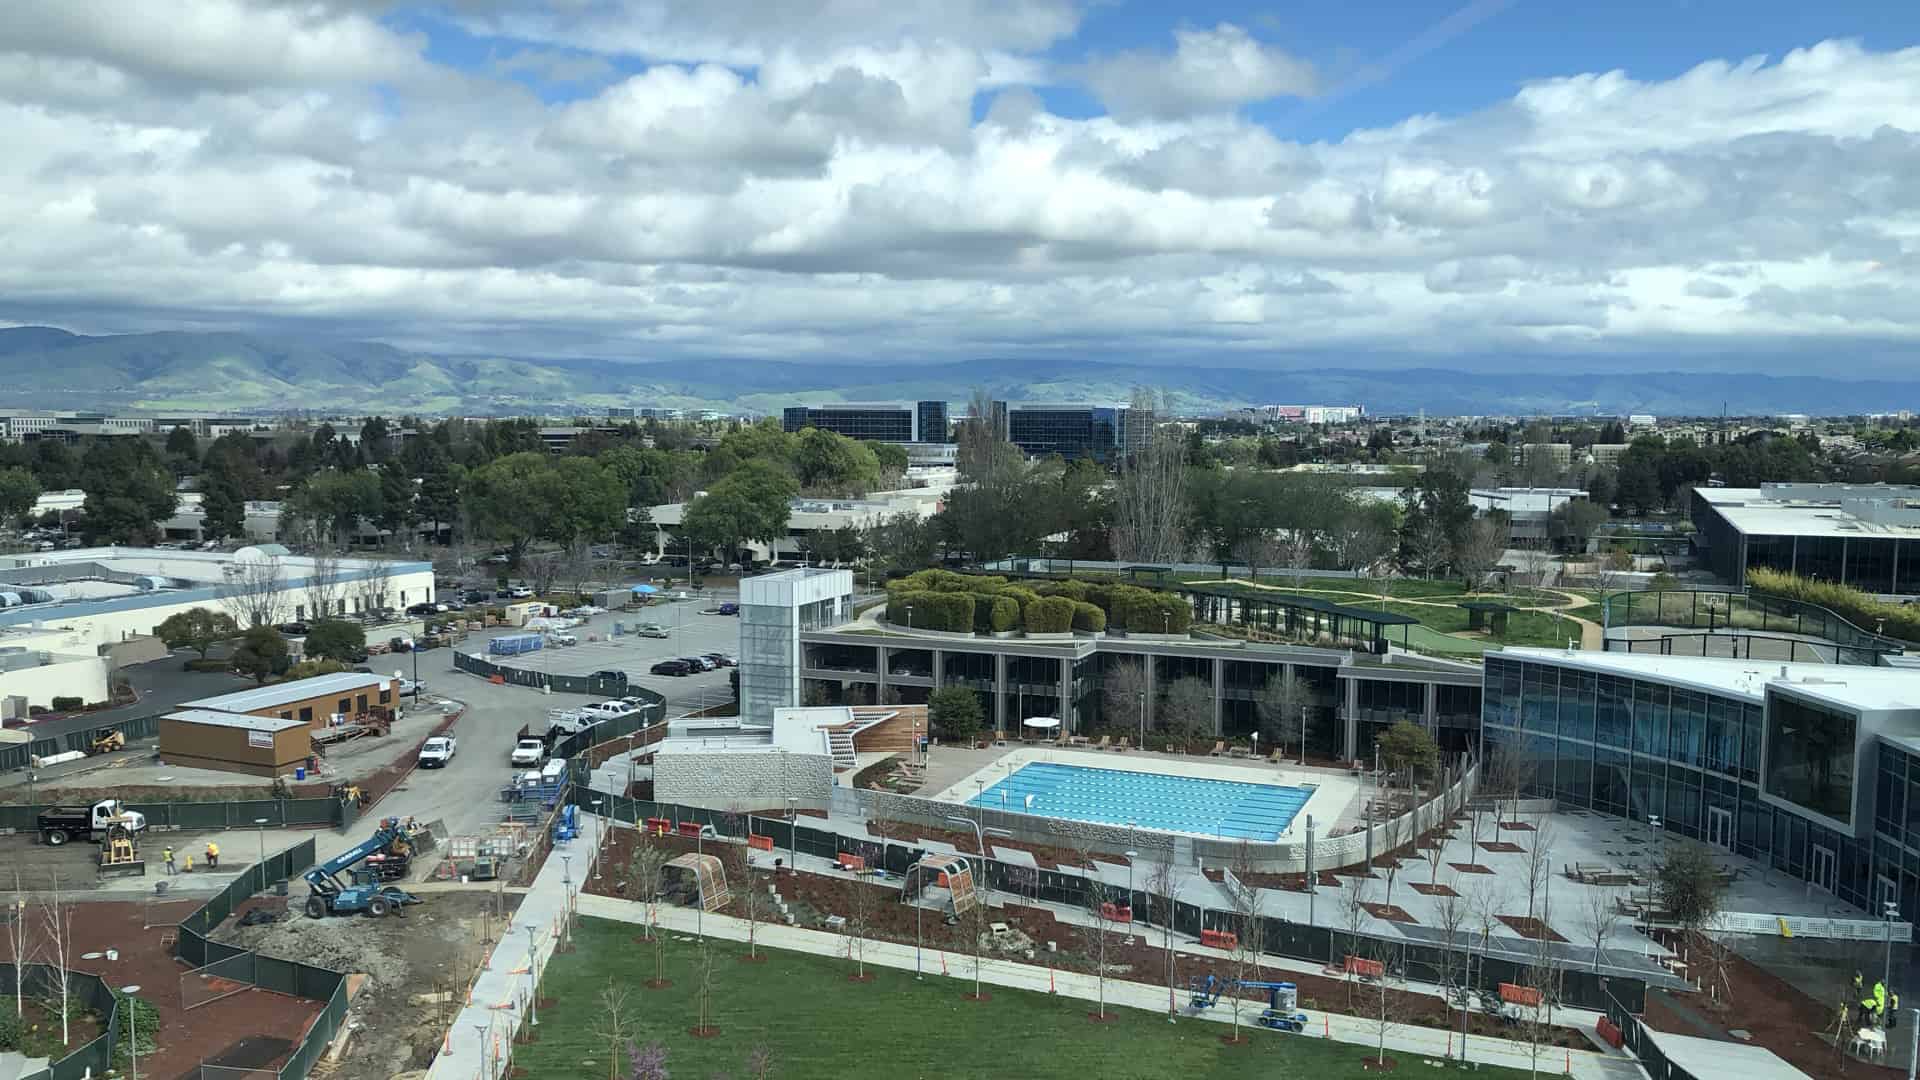 View of Bay Area from GKE Office in Sunnyvale